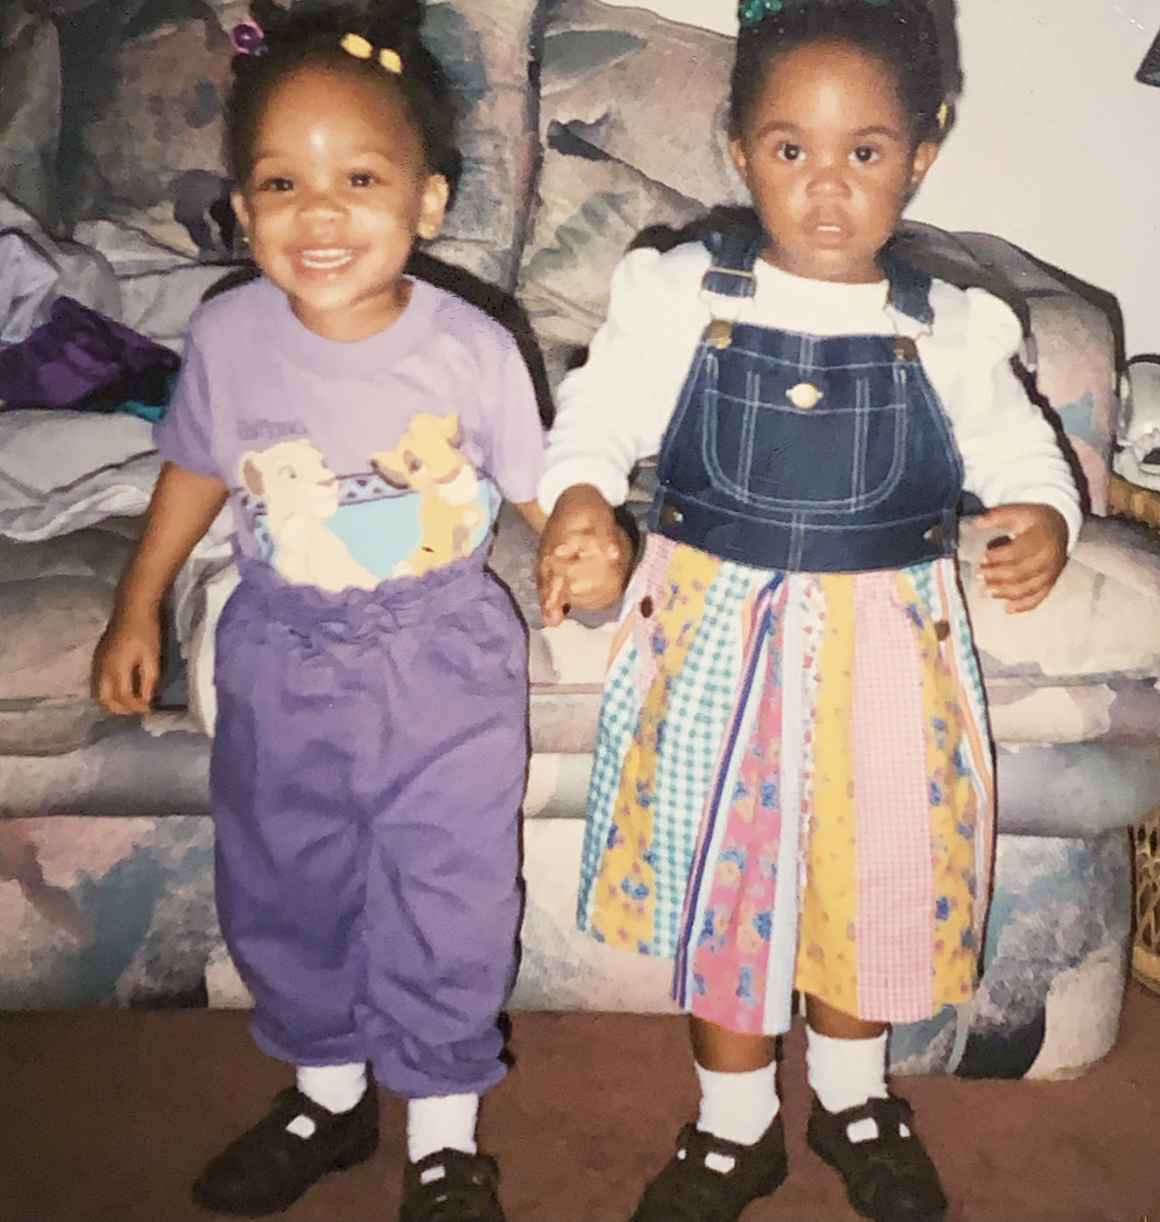 Antoinette and Alicia are sisters. They are young children in this photo of them holding hands. The original Tia and Tamera! Sister, Sister: est. 1993.